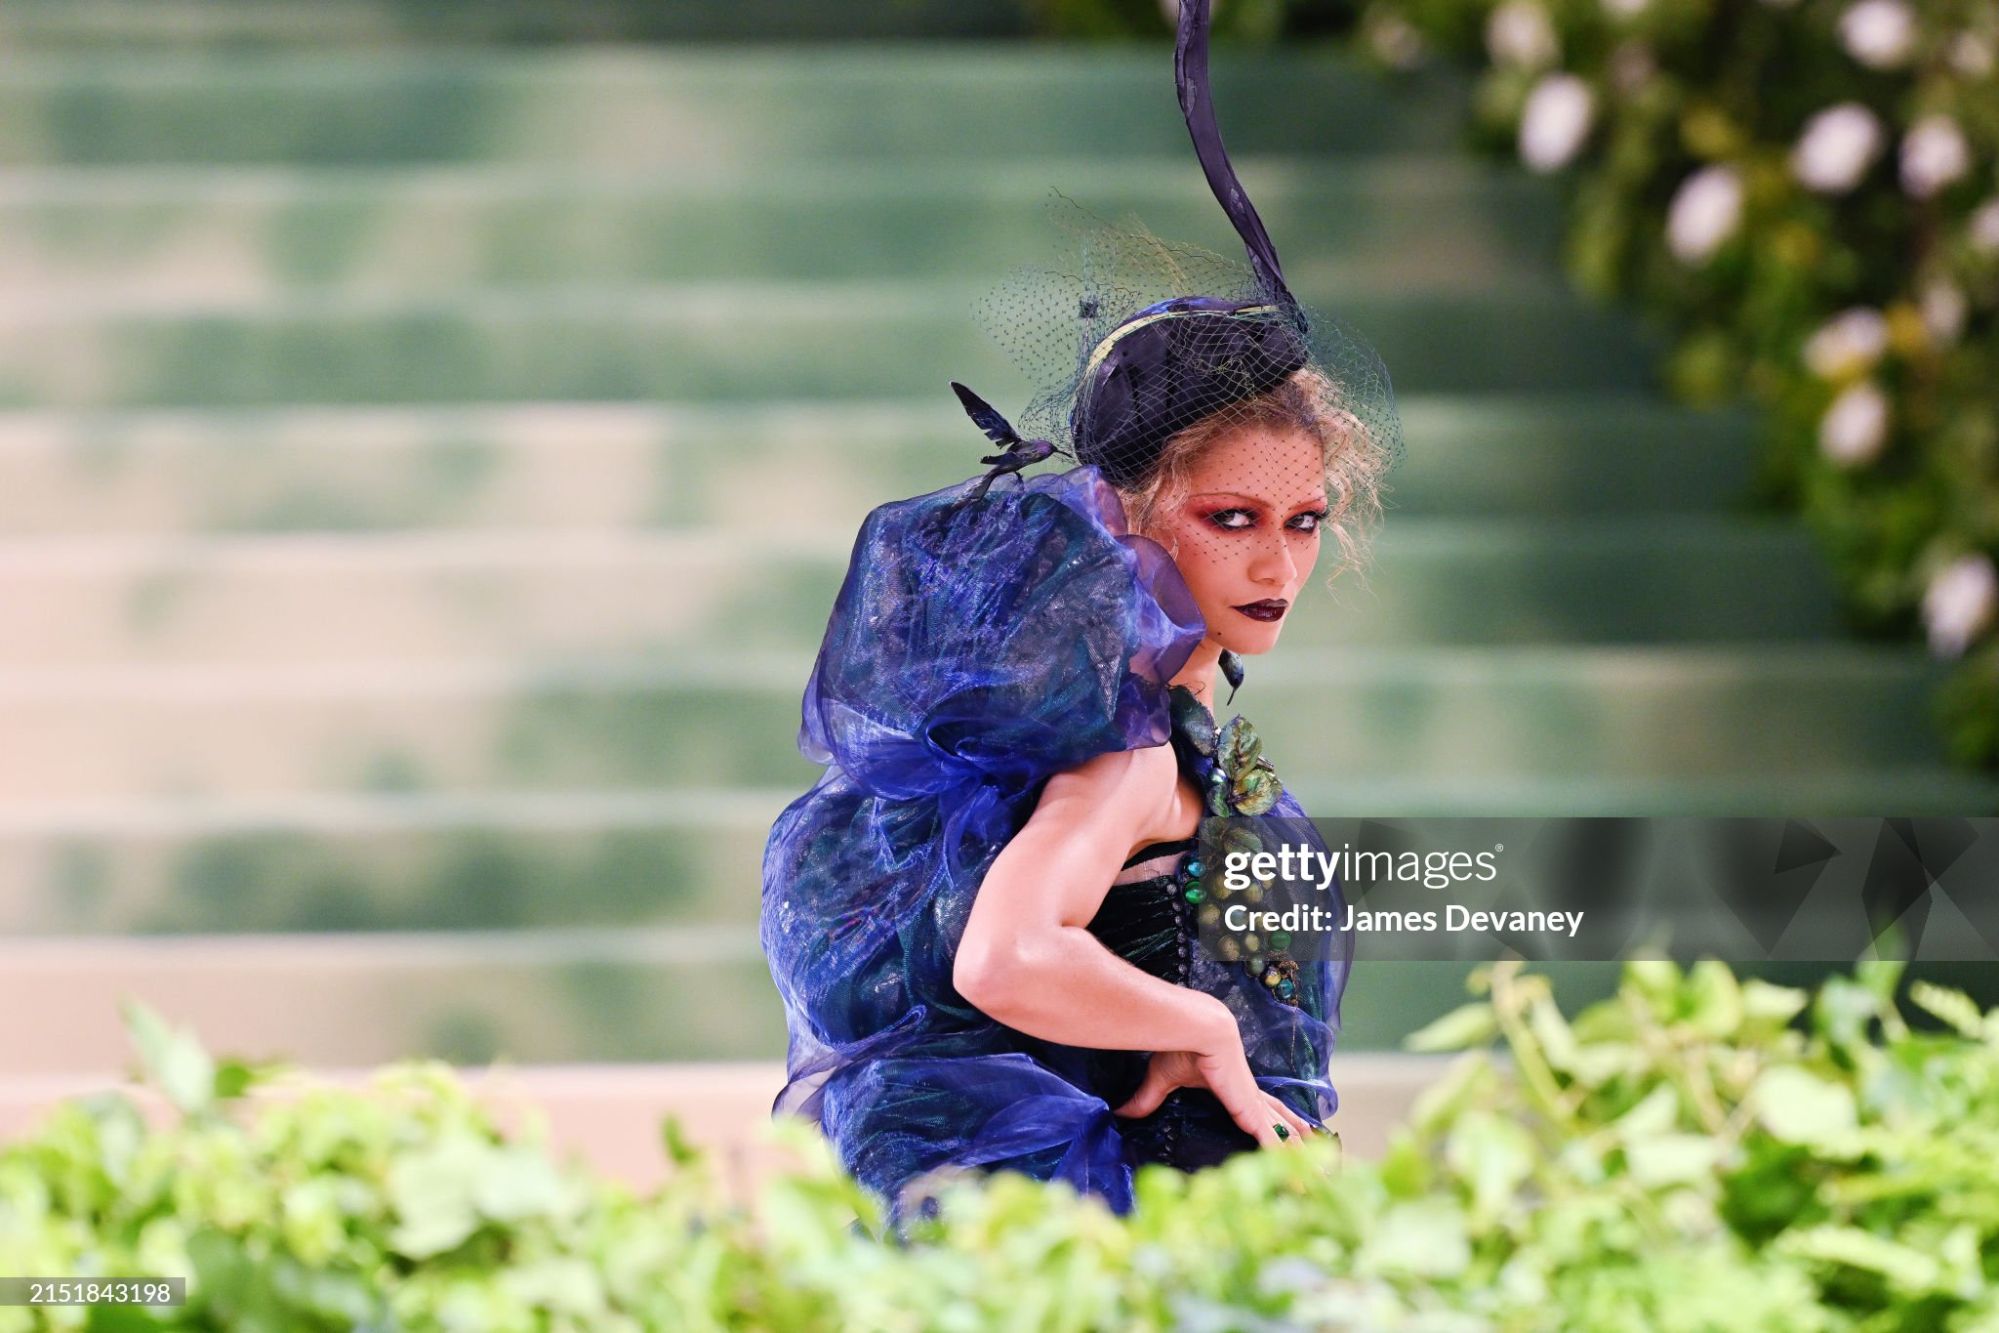 gettyimages-2151843198-2048x2048.jpg